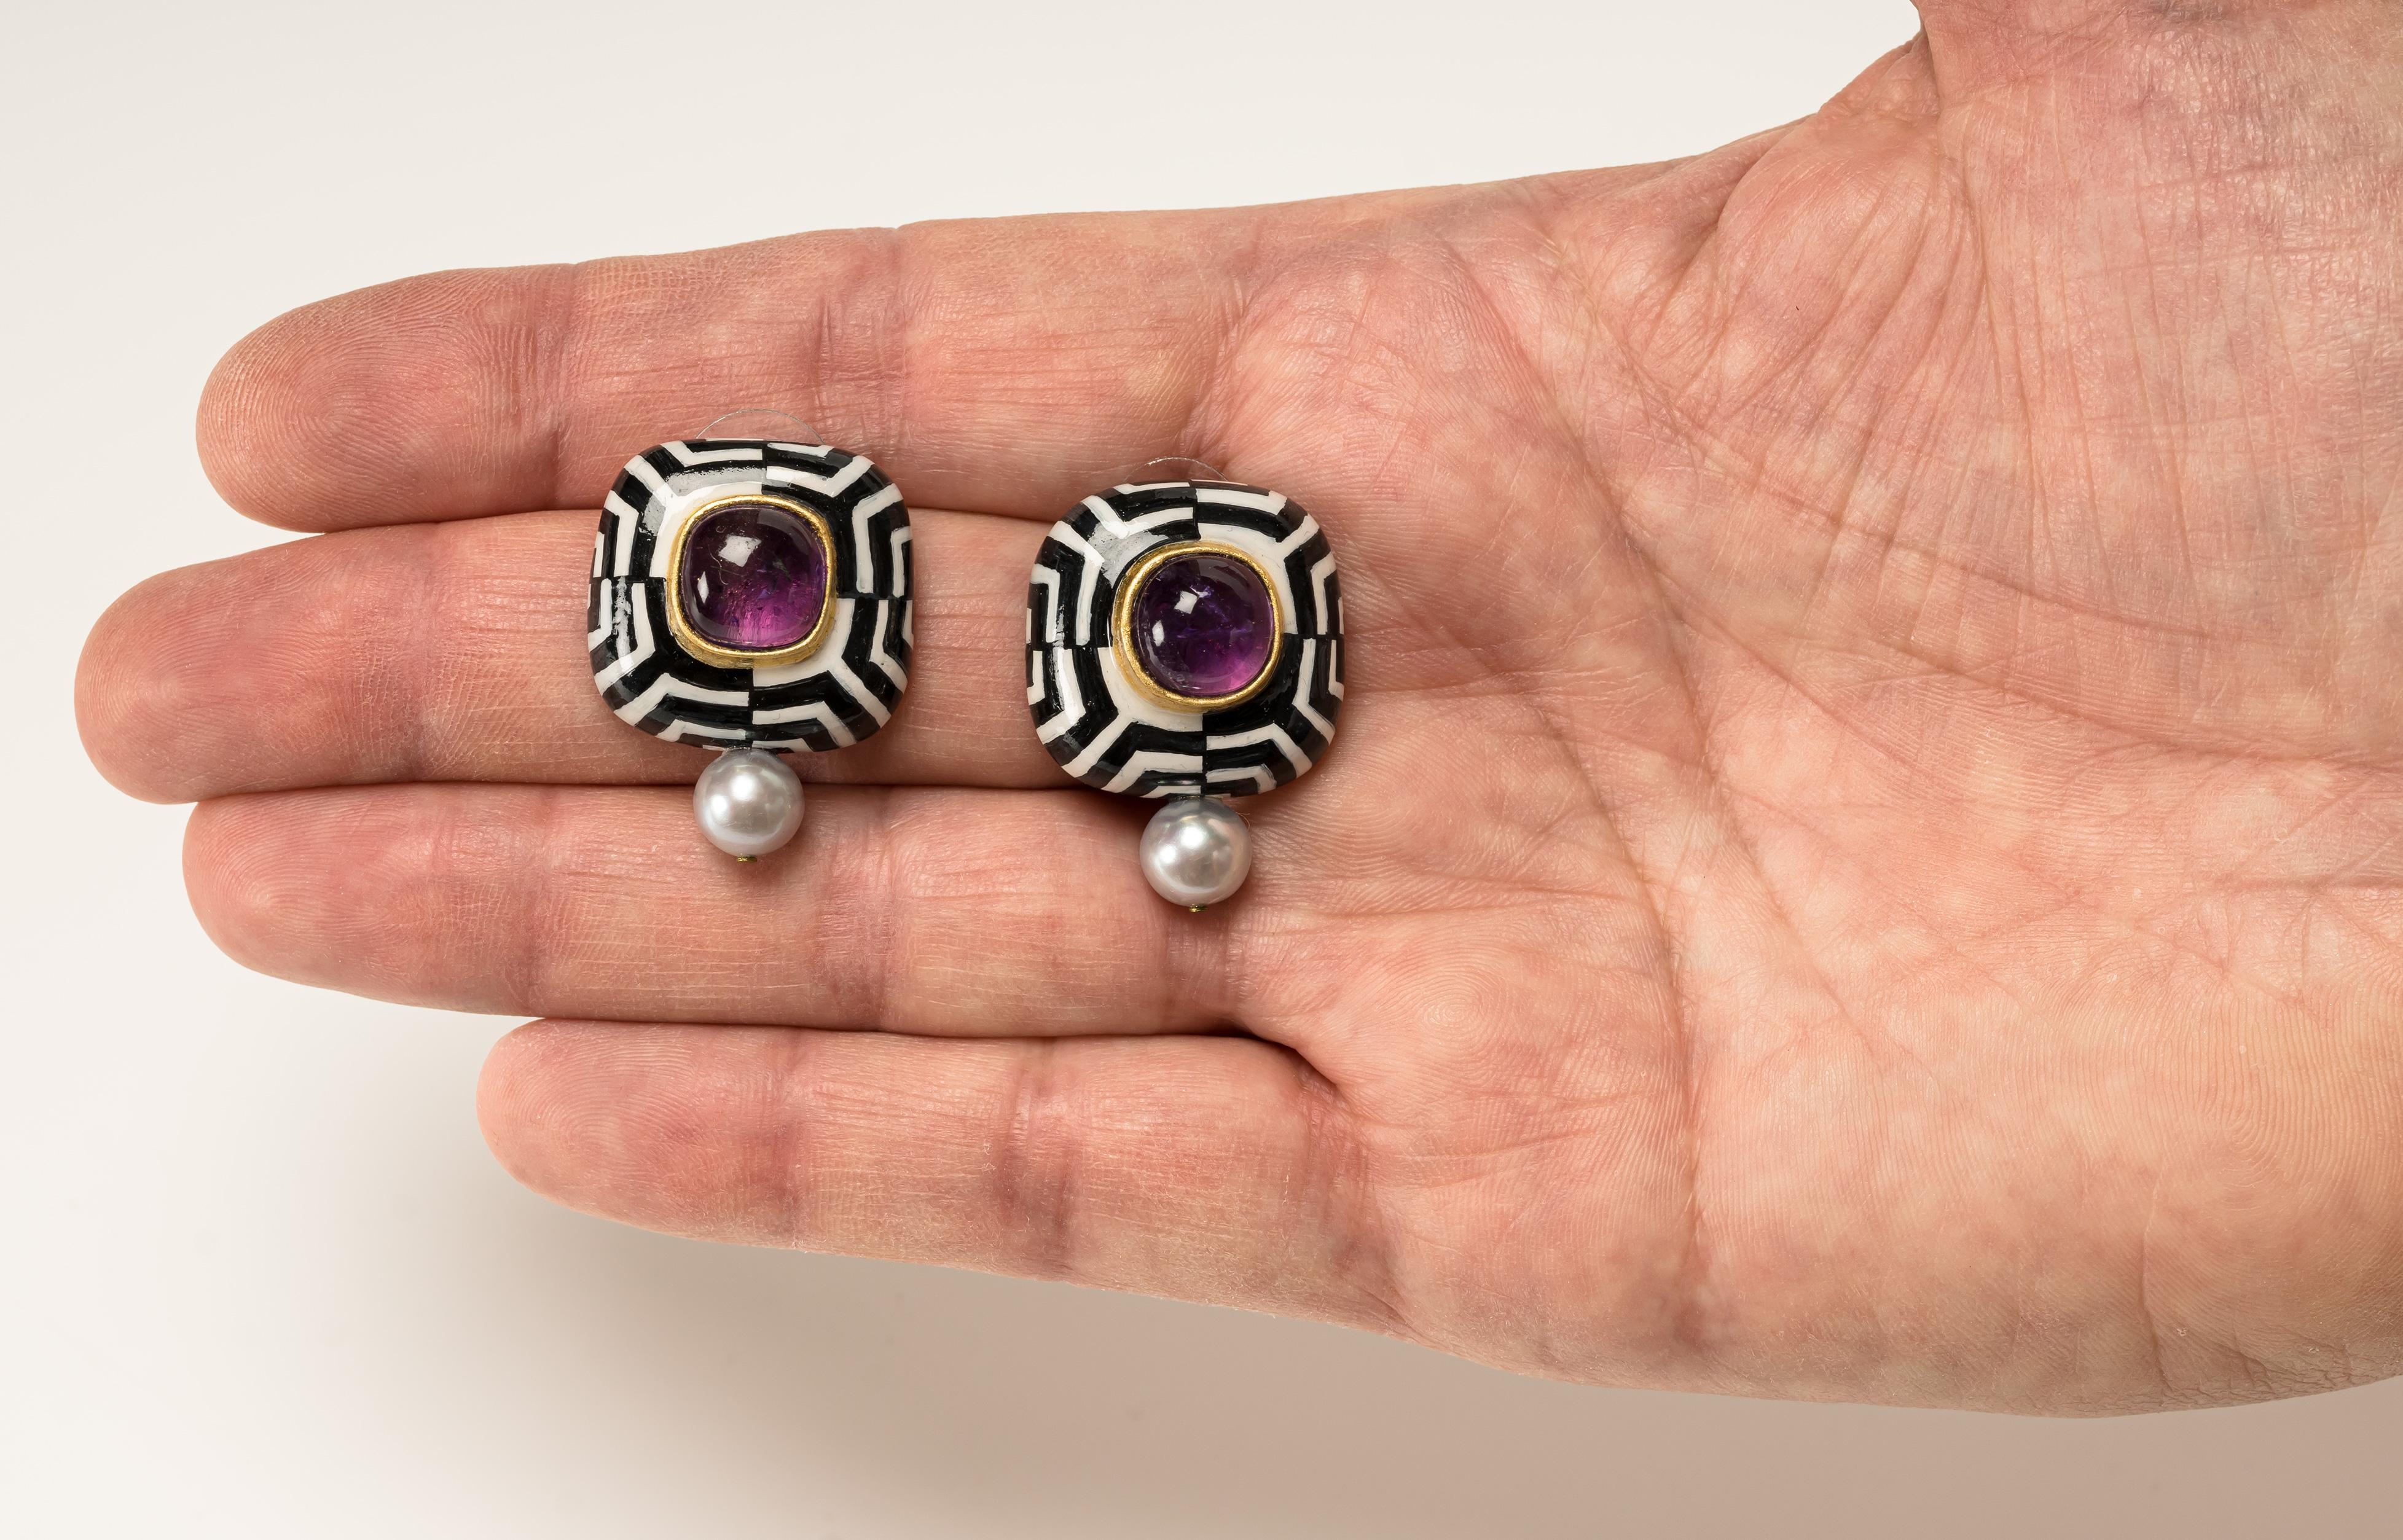 Earrings “ Hypno 2”, 2020, are a limited edition contemporary author jewelry by italian artist Gian Luca Bartellone.
Materials: papier-mâché, silver, amethysts, pearls, gold leaf 22kt.

The main body is made of papier-mâché and hand painted with